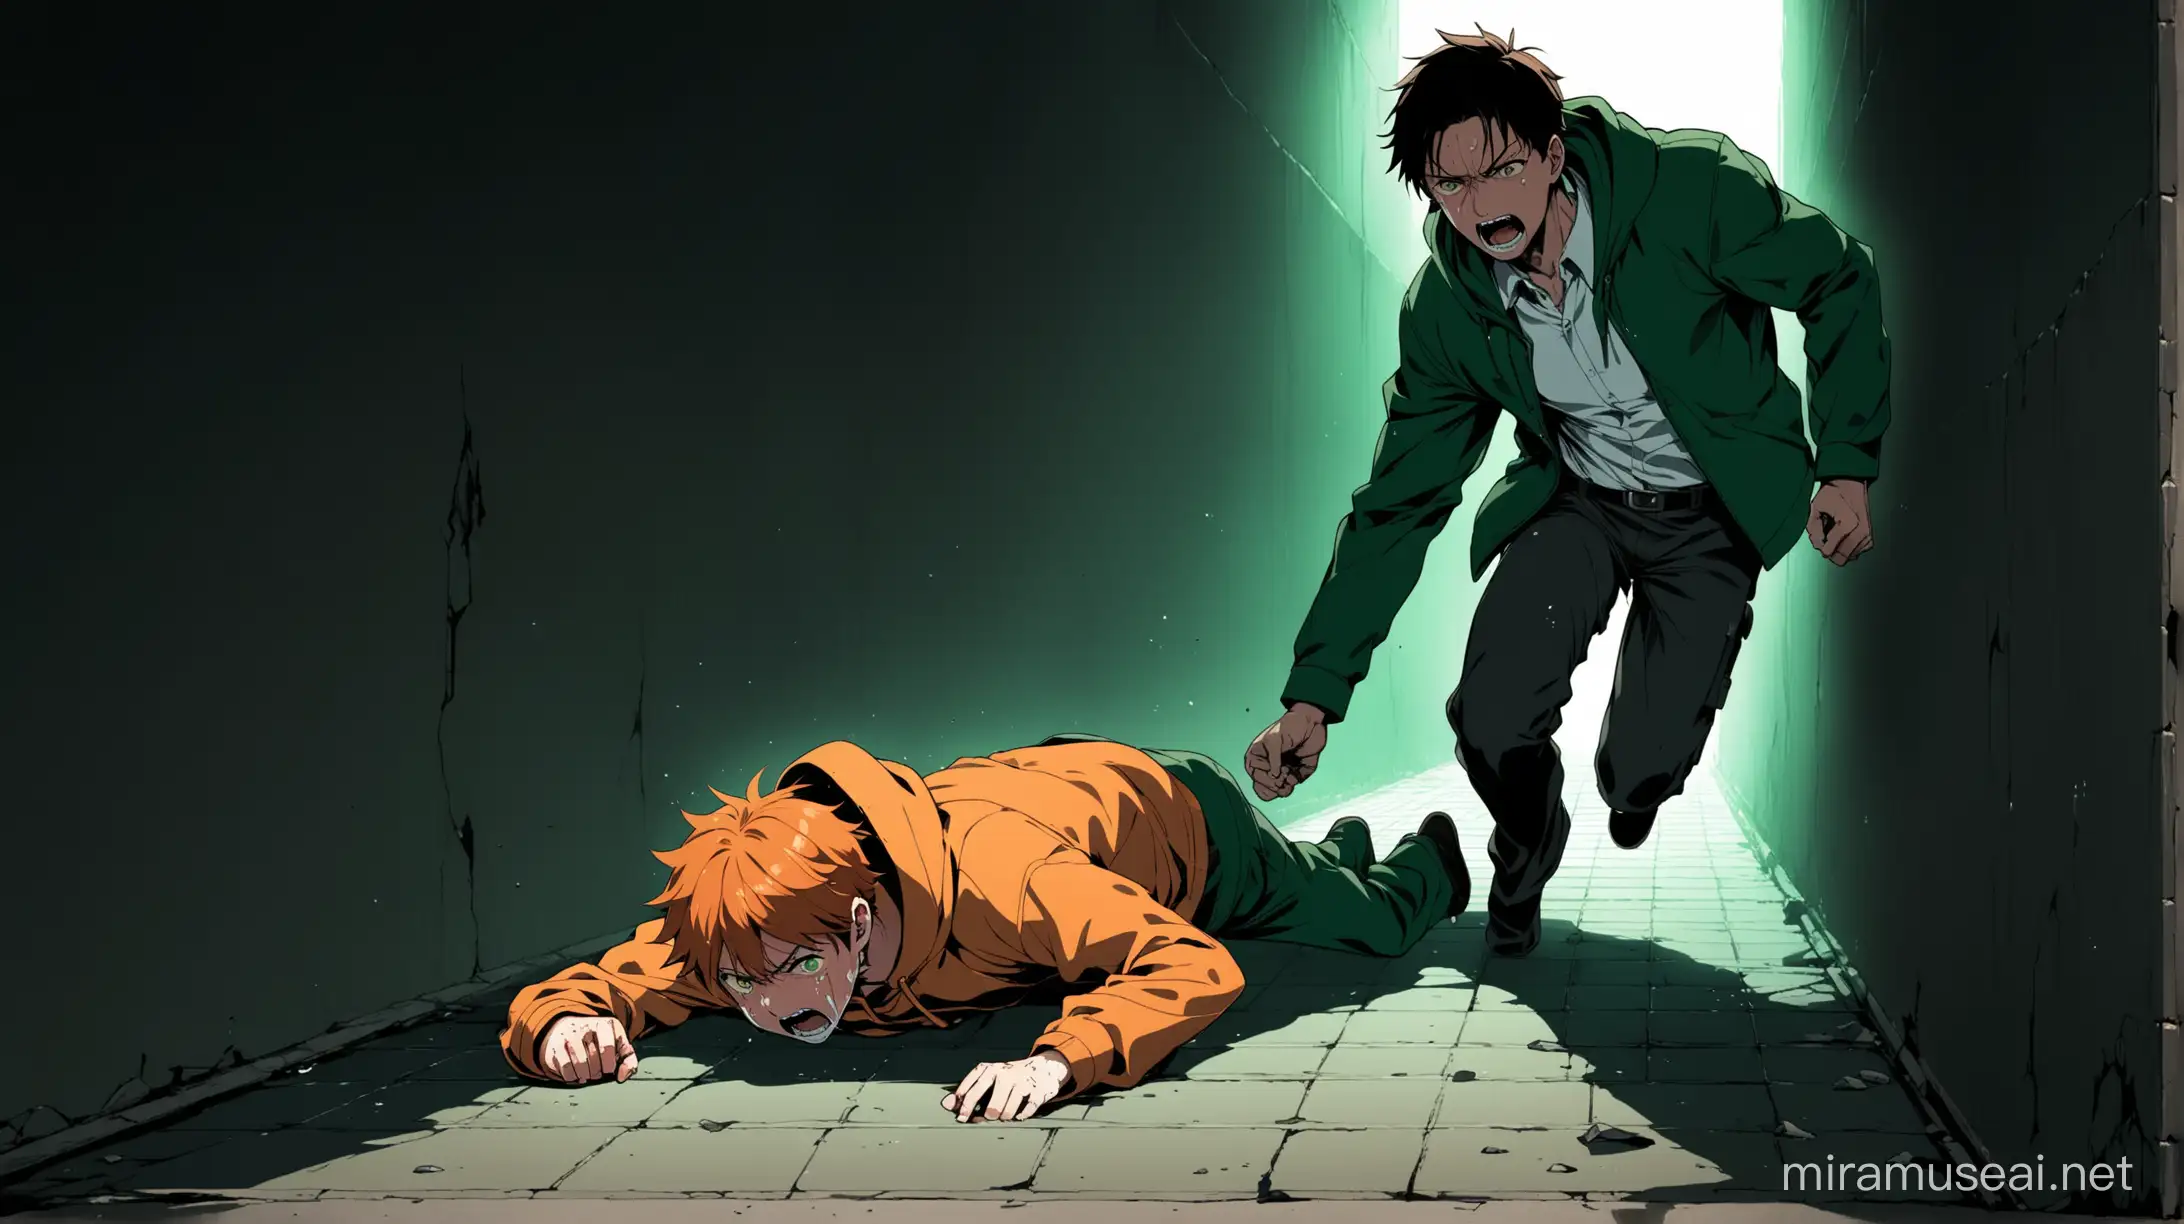 A side view image of of two anime characters in which there is a boy teenager who is handcuffed, crying, screaming and running towards his dad who is injured badly and sitting on the floor unconsciously. The boy is teenager, crying, orange headed, orange eyes, wearing dark green hoodie, handsome and running towards his unconscious father sitting on the floor of an underground secret room with dark green contrasts and vibe. His father is unconscious, injured, detective, dark brown headed, orange eyes, wearing detective clothes with dark brown and skin contrast. The image is of the boy running towards the father who is a detective and injured badly, unconscious and lying on a floor supporting a wall